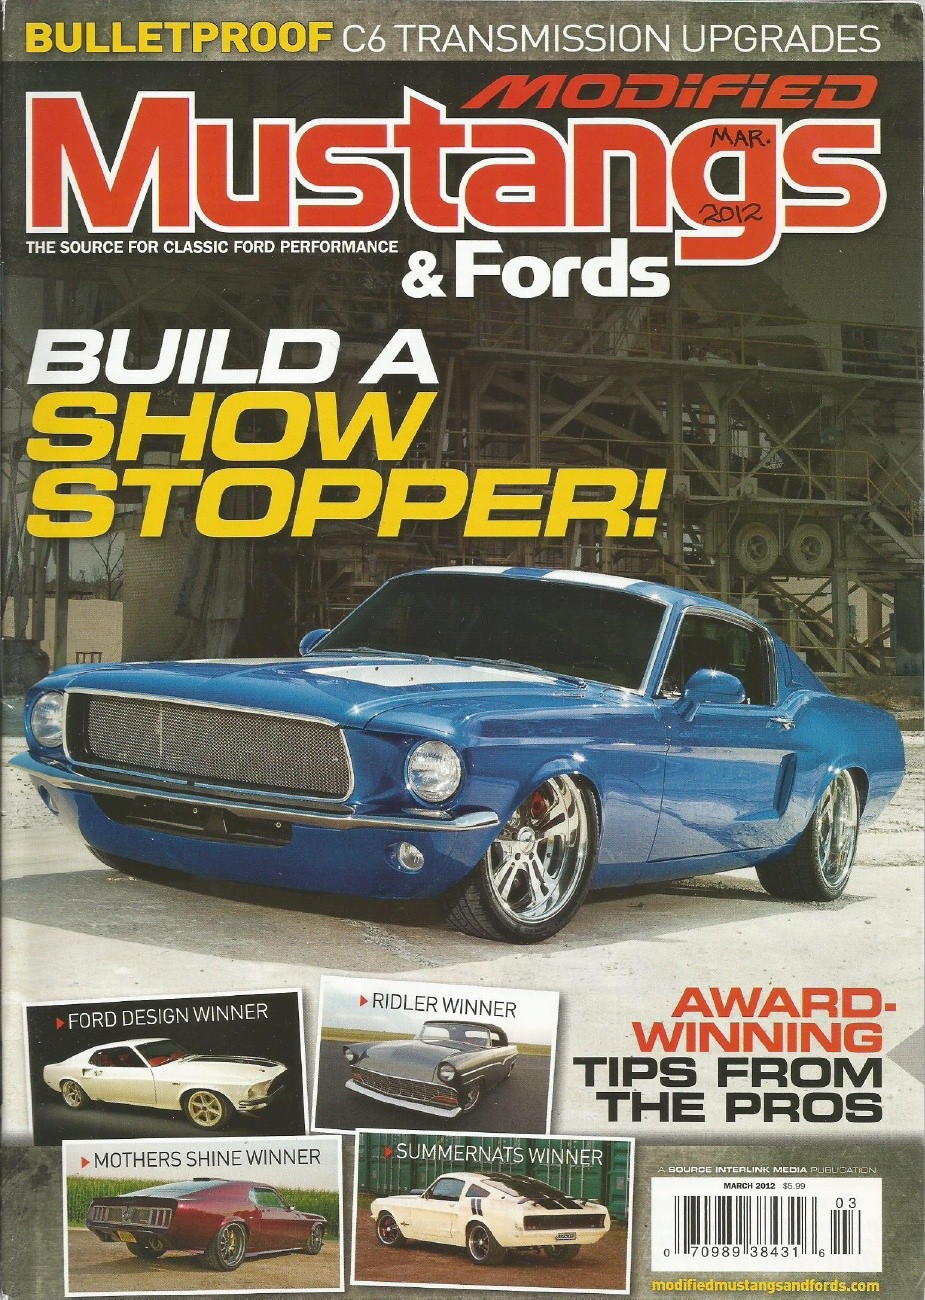 Modified Mustangs & Fords 2012 Mar - C6 Upgrades, Hot Pro Tips